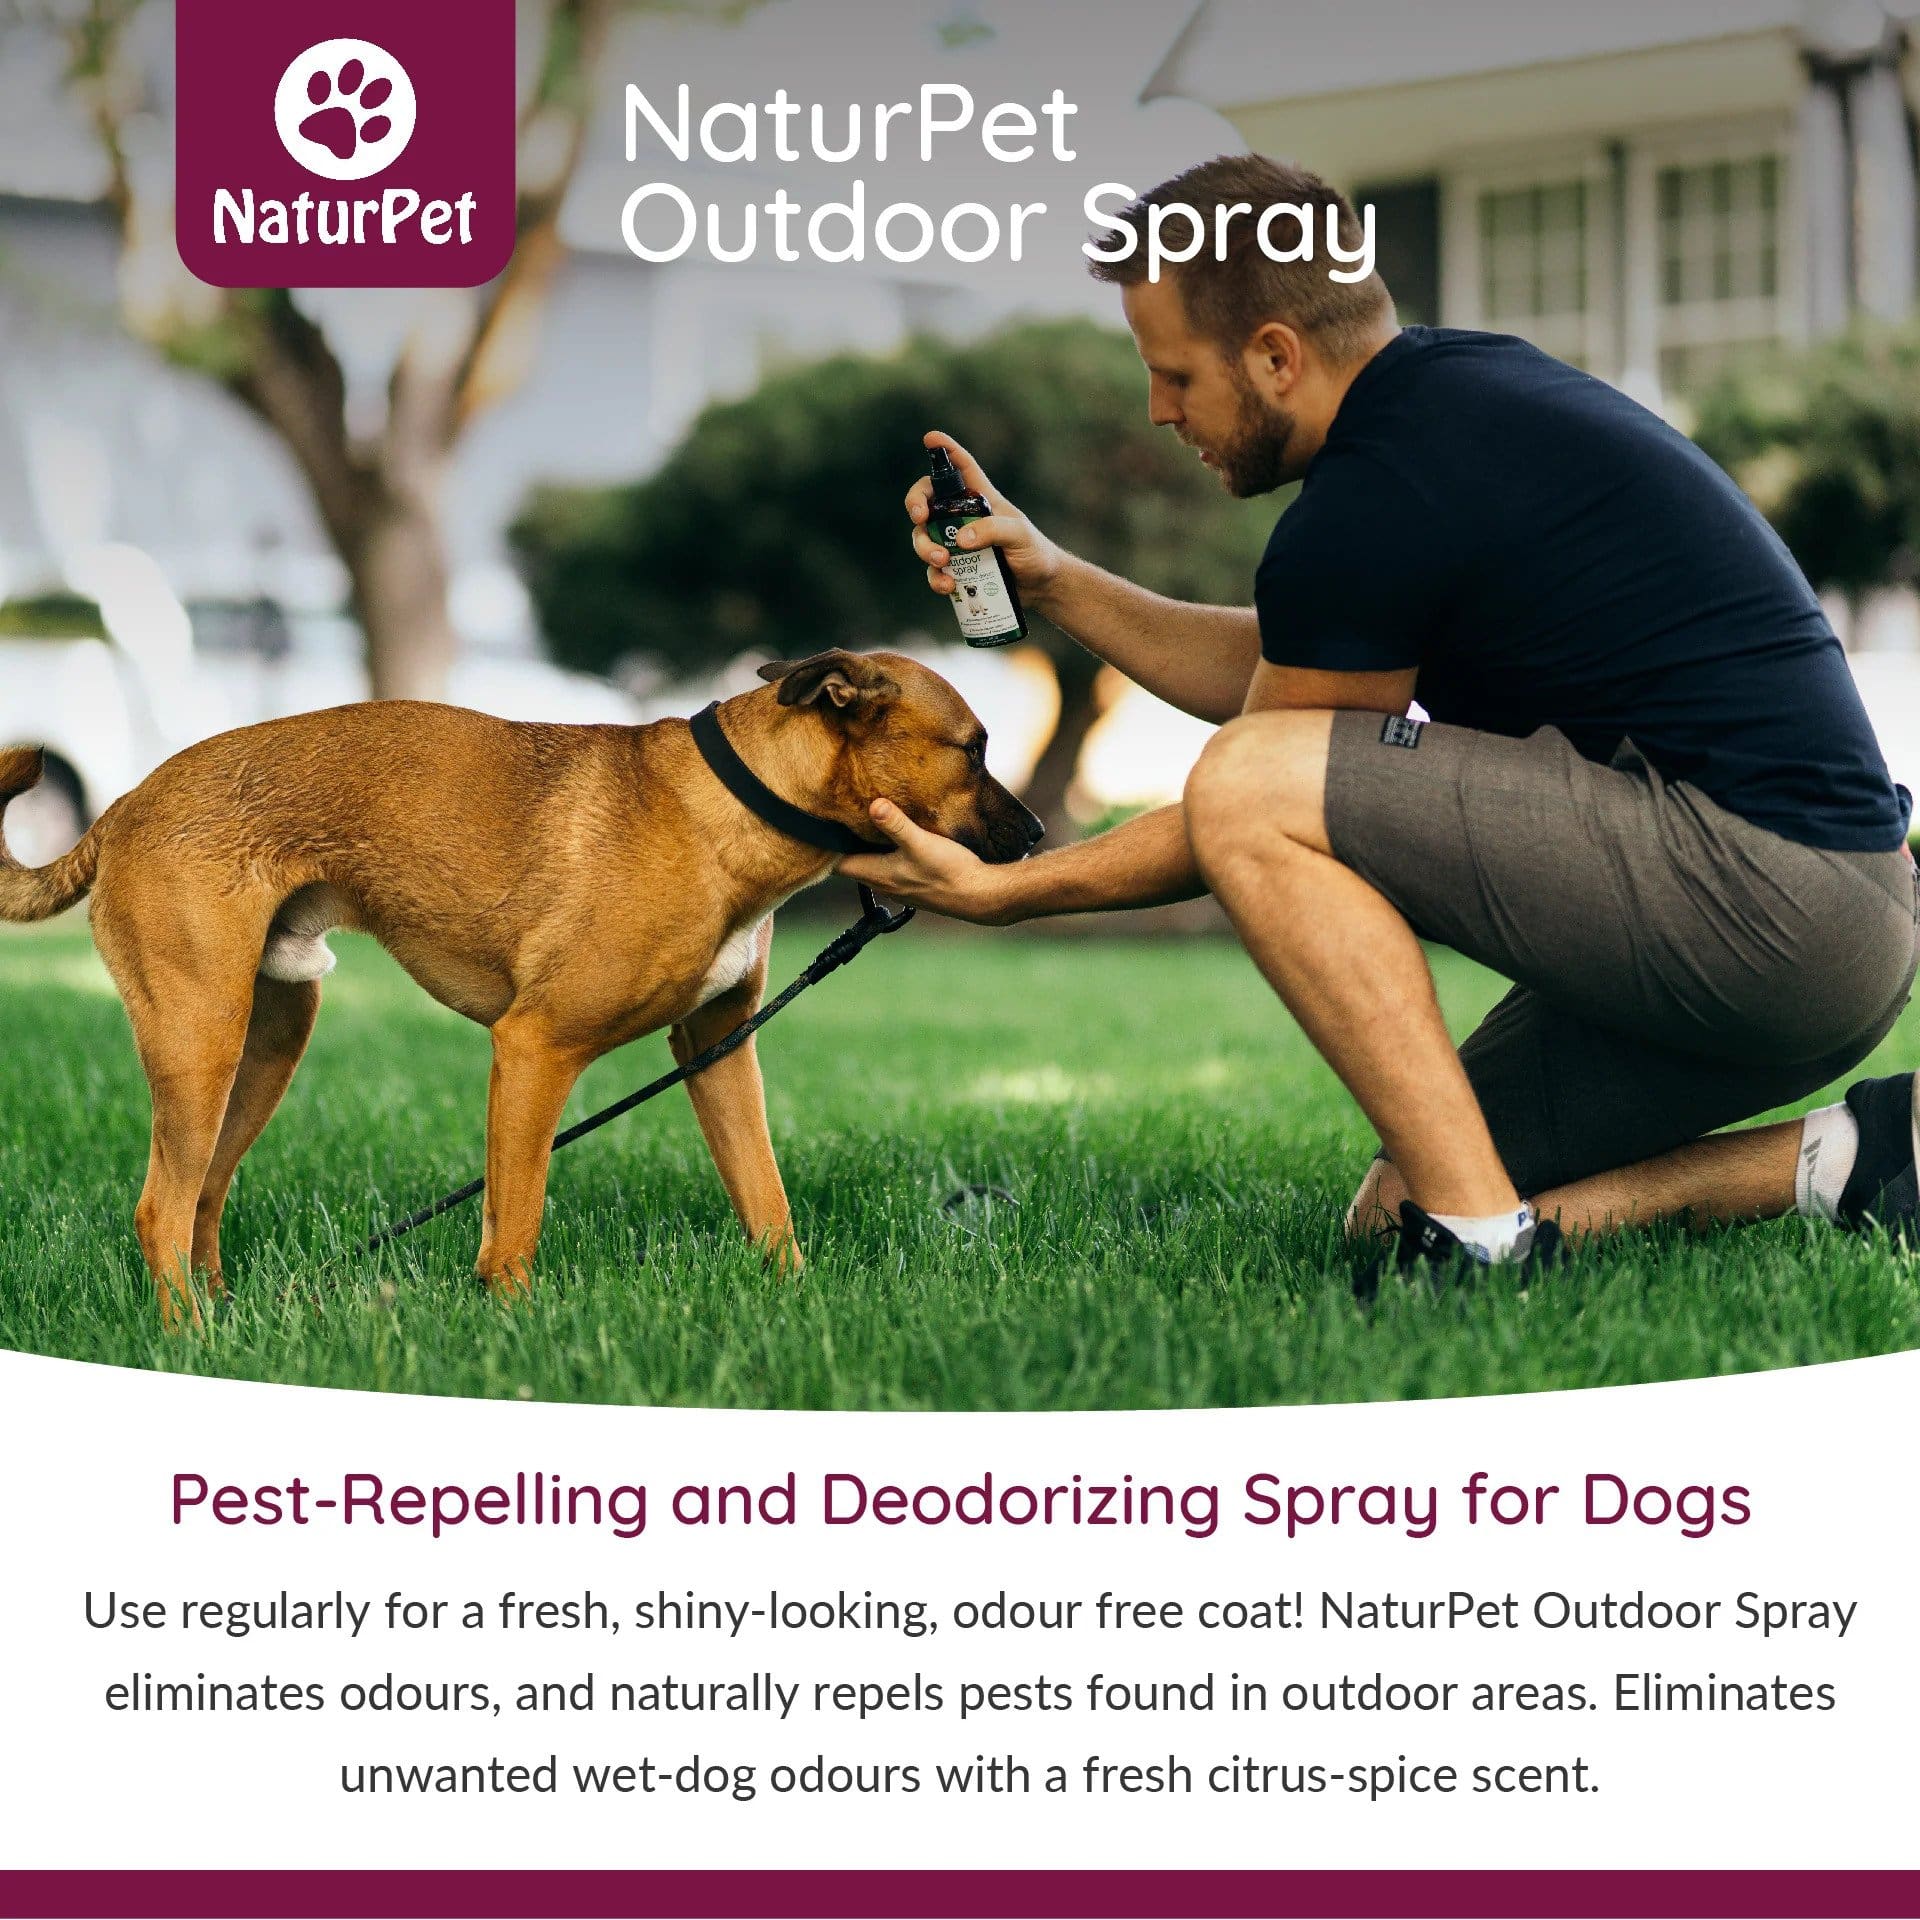 NaturPet Outdoor Spray - A Must-Have For Hikes & Wet Dogs! How to use